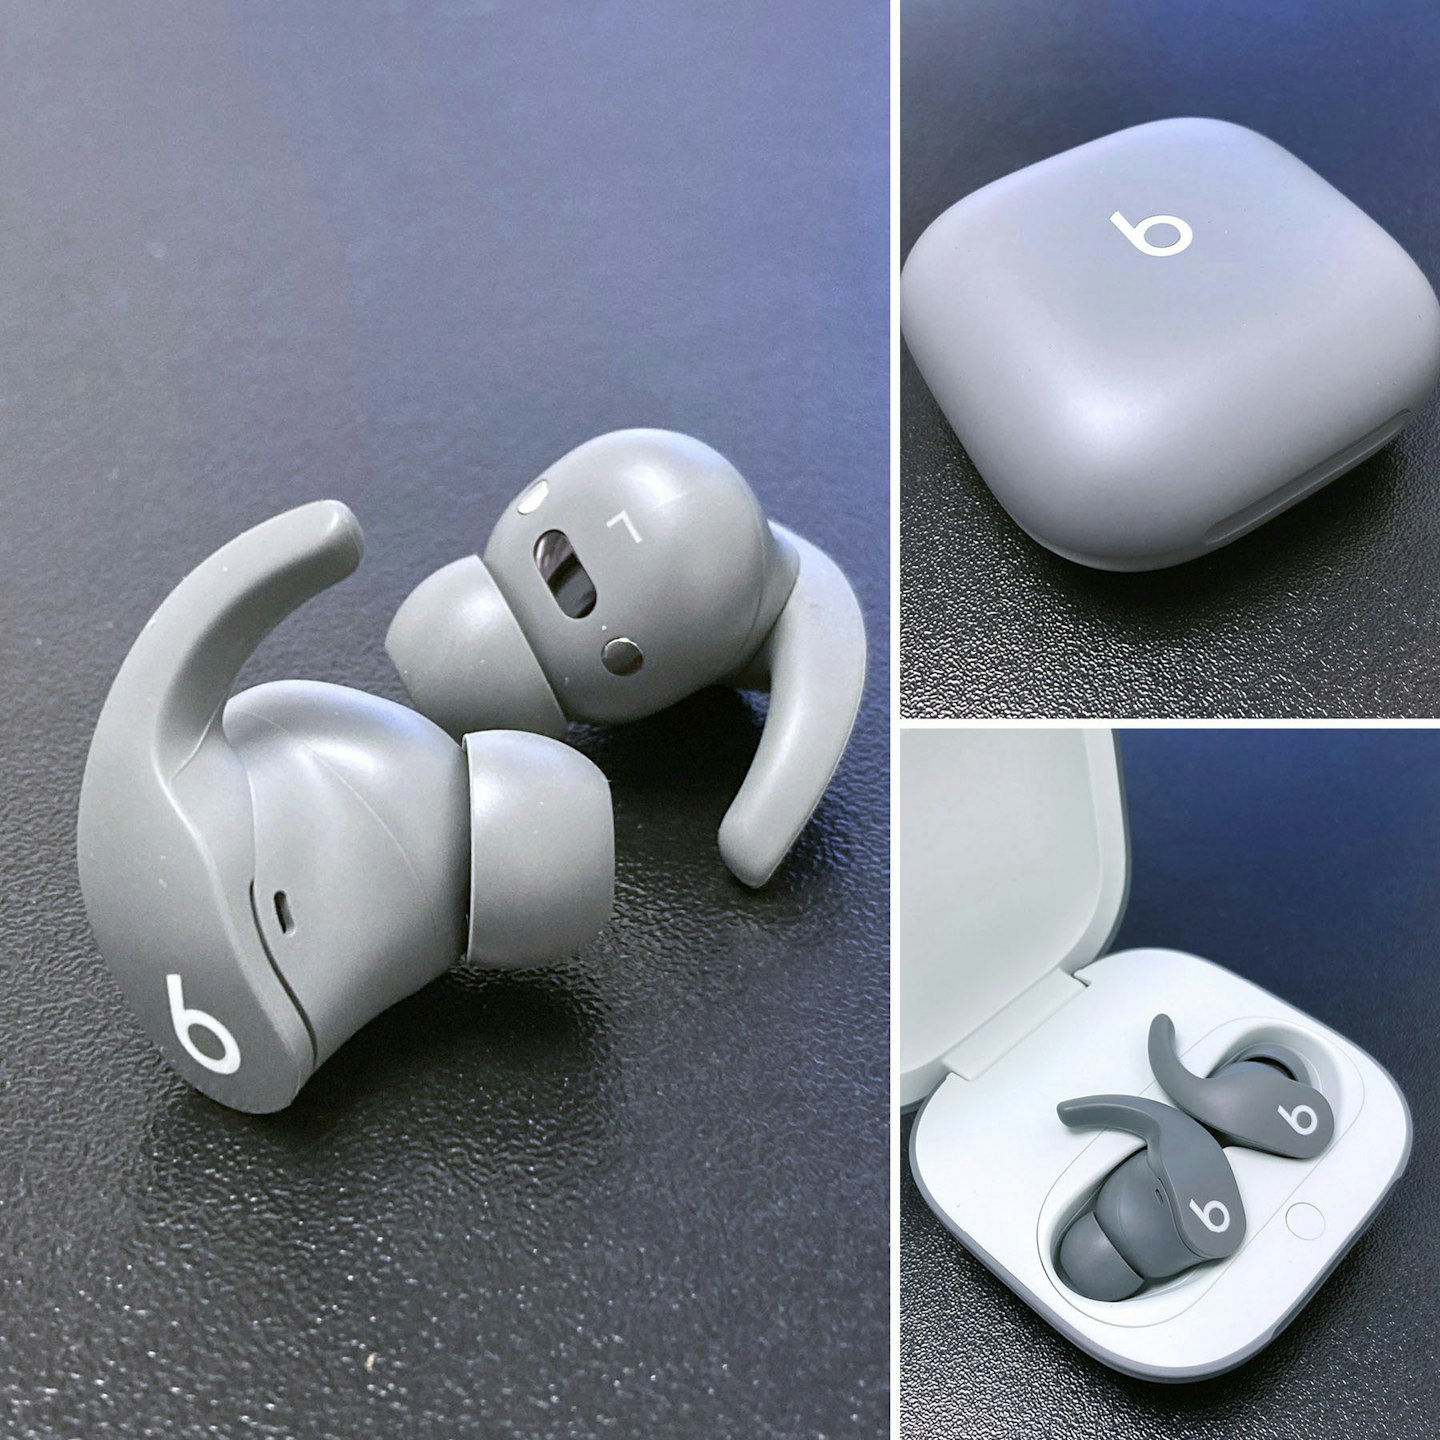 Belkin Soundform Immerse vs Xiaomi Buds 3 Pro: What is the difference?